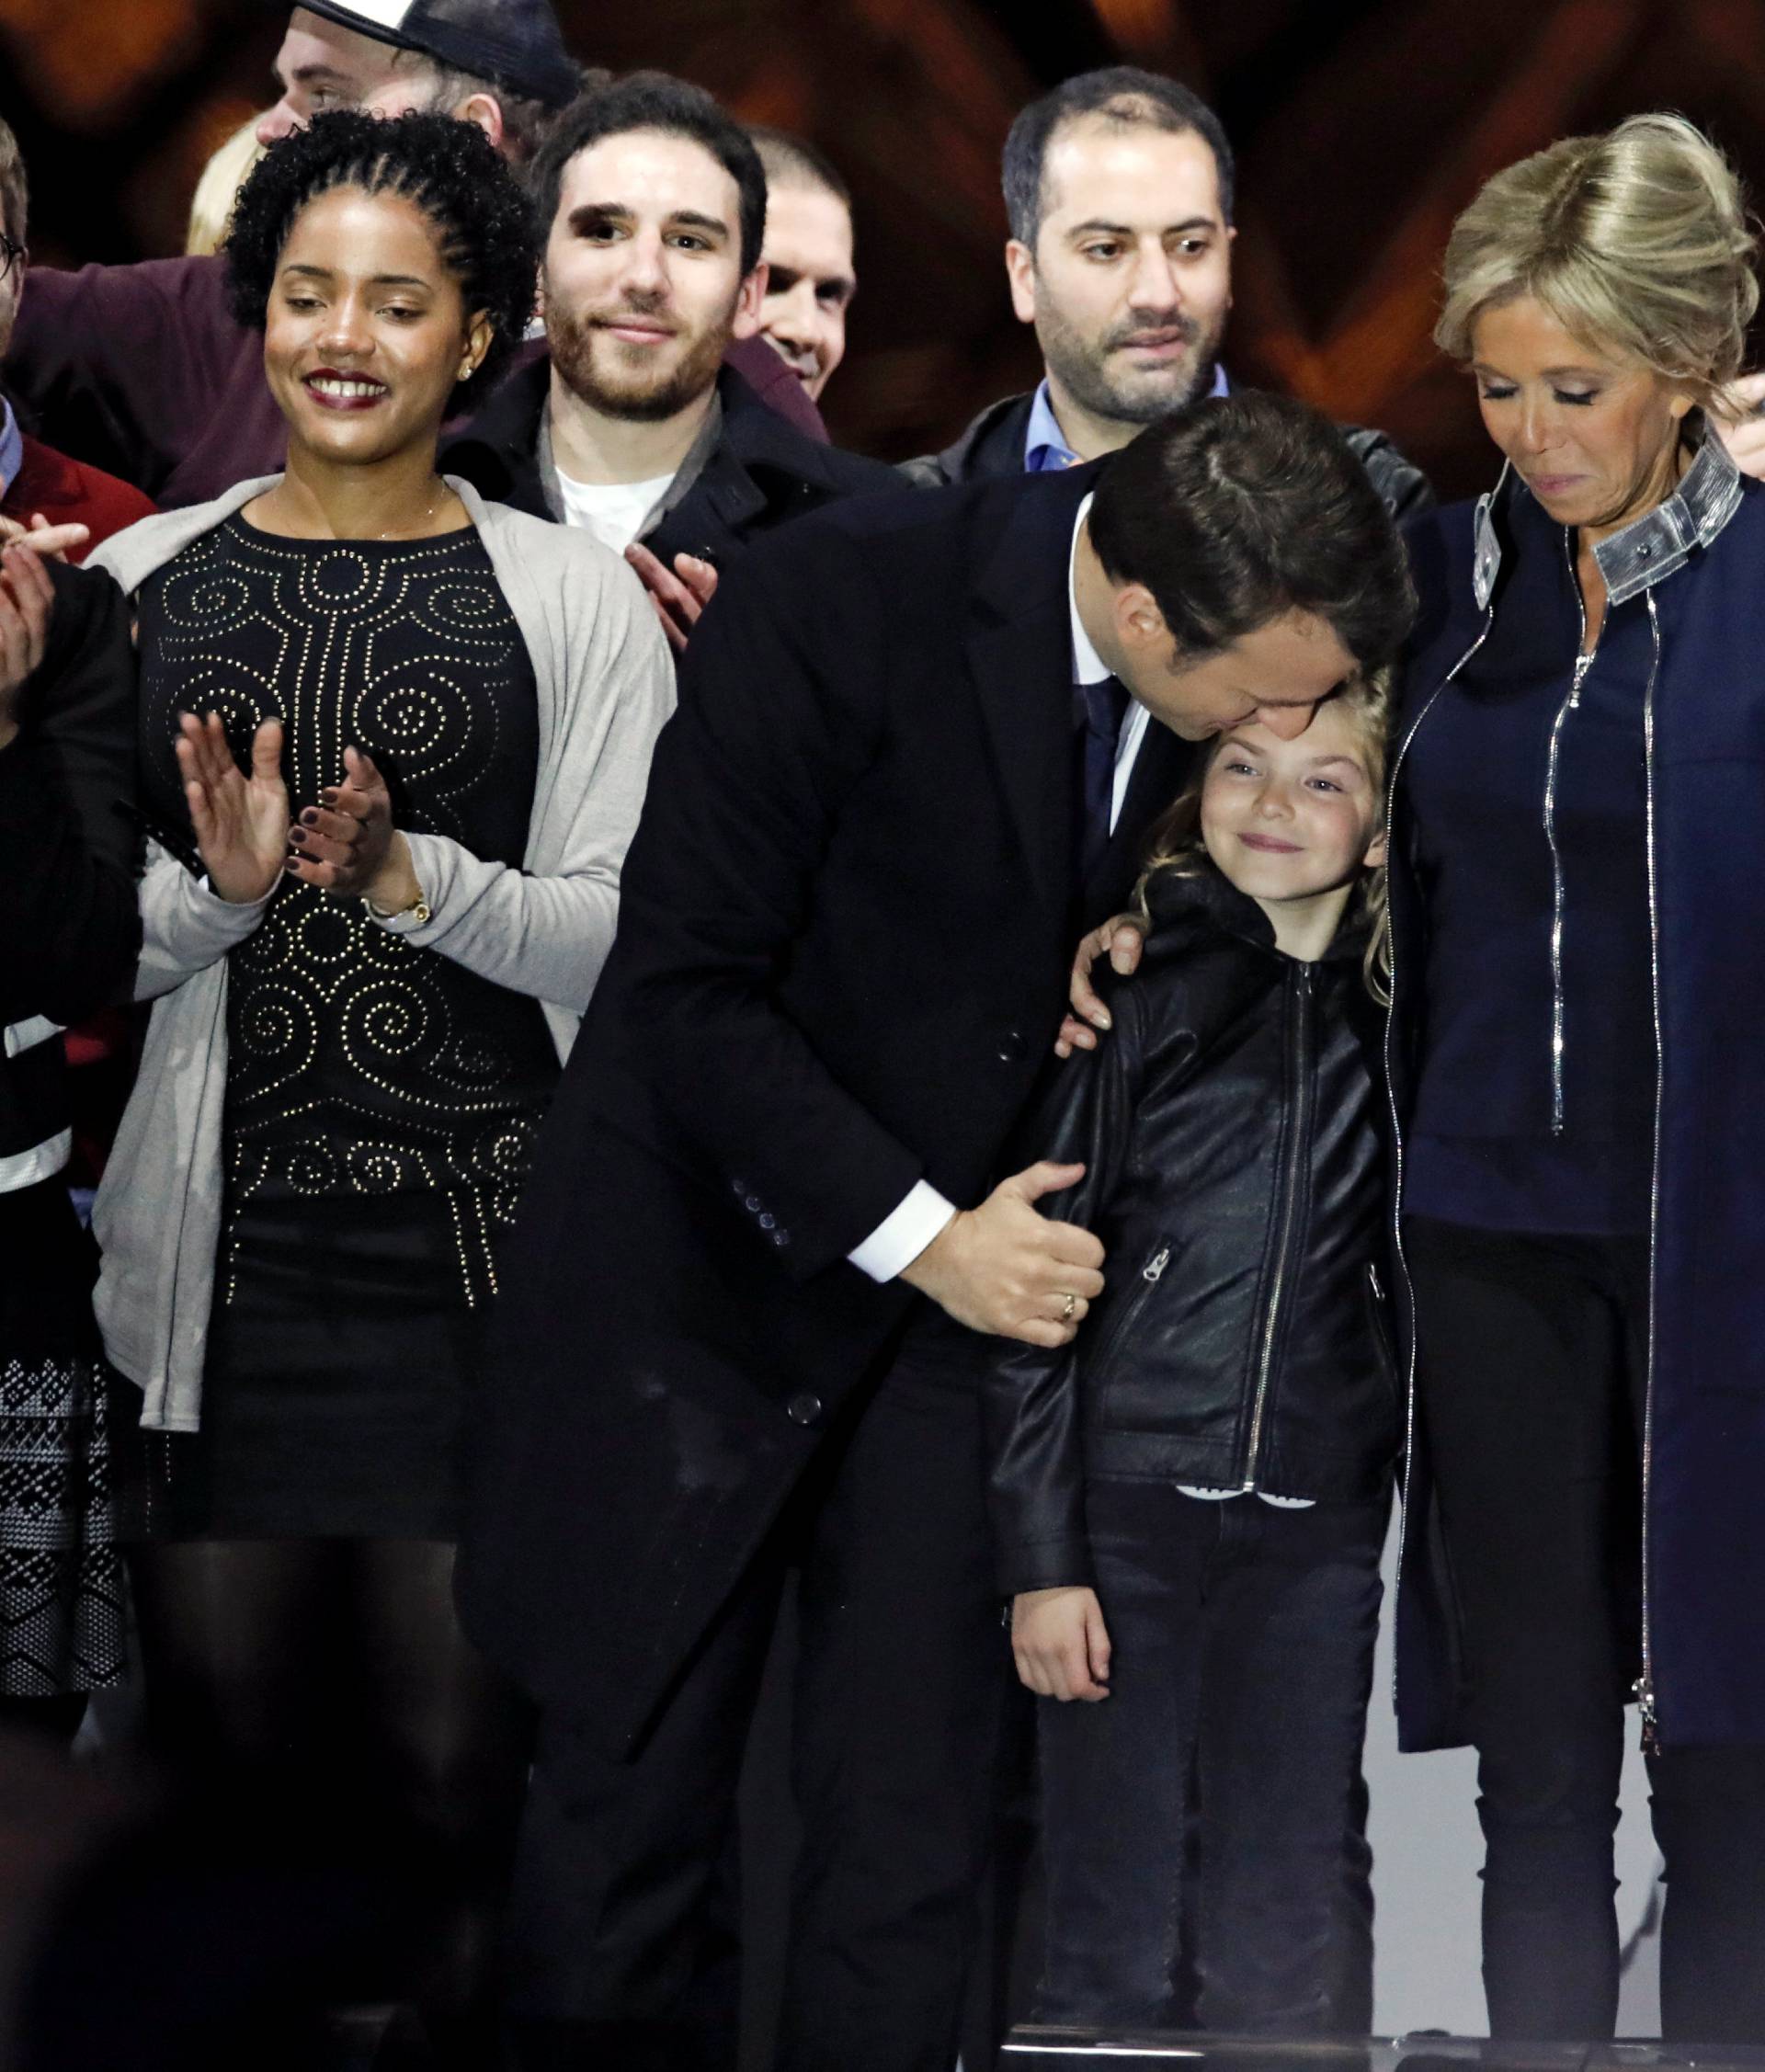 French President elect Emmanuel Macron and his wife Brigitte Trogneux celebrate on the stage at his victory rally near the Louvre in Paris, France May 7, 2017.